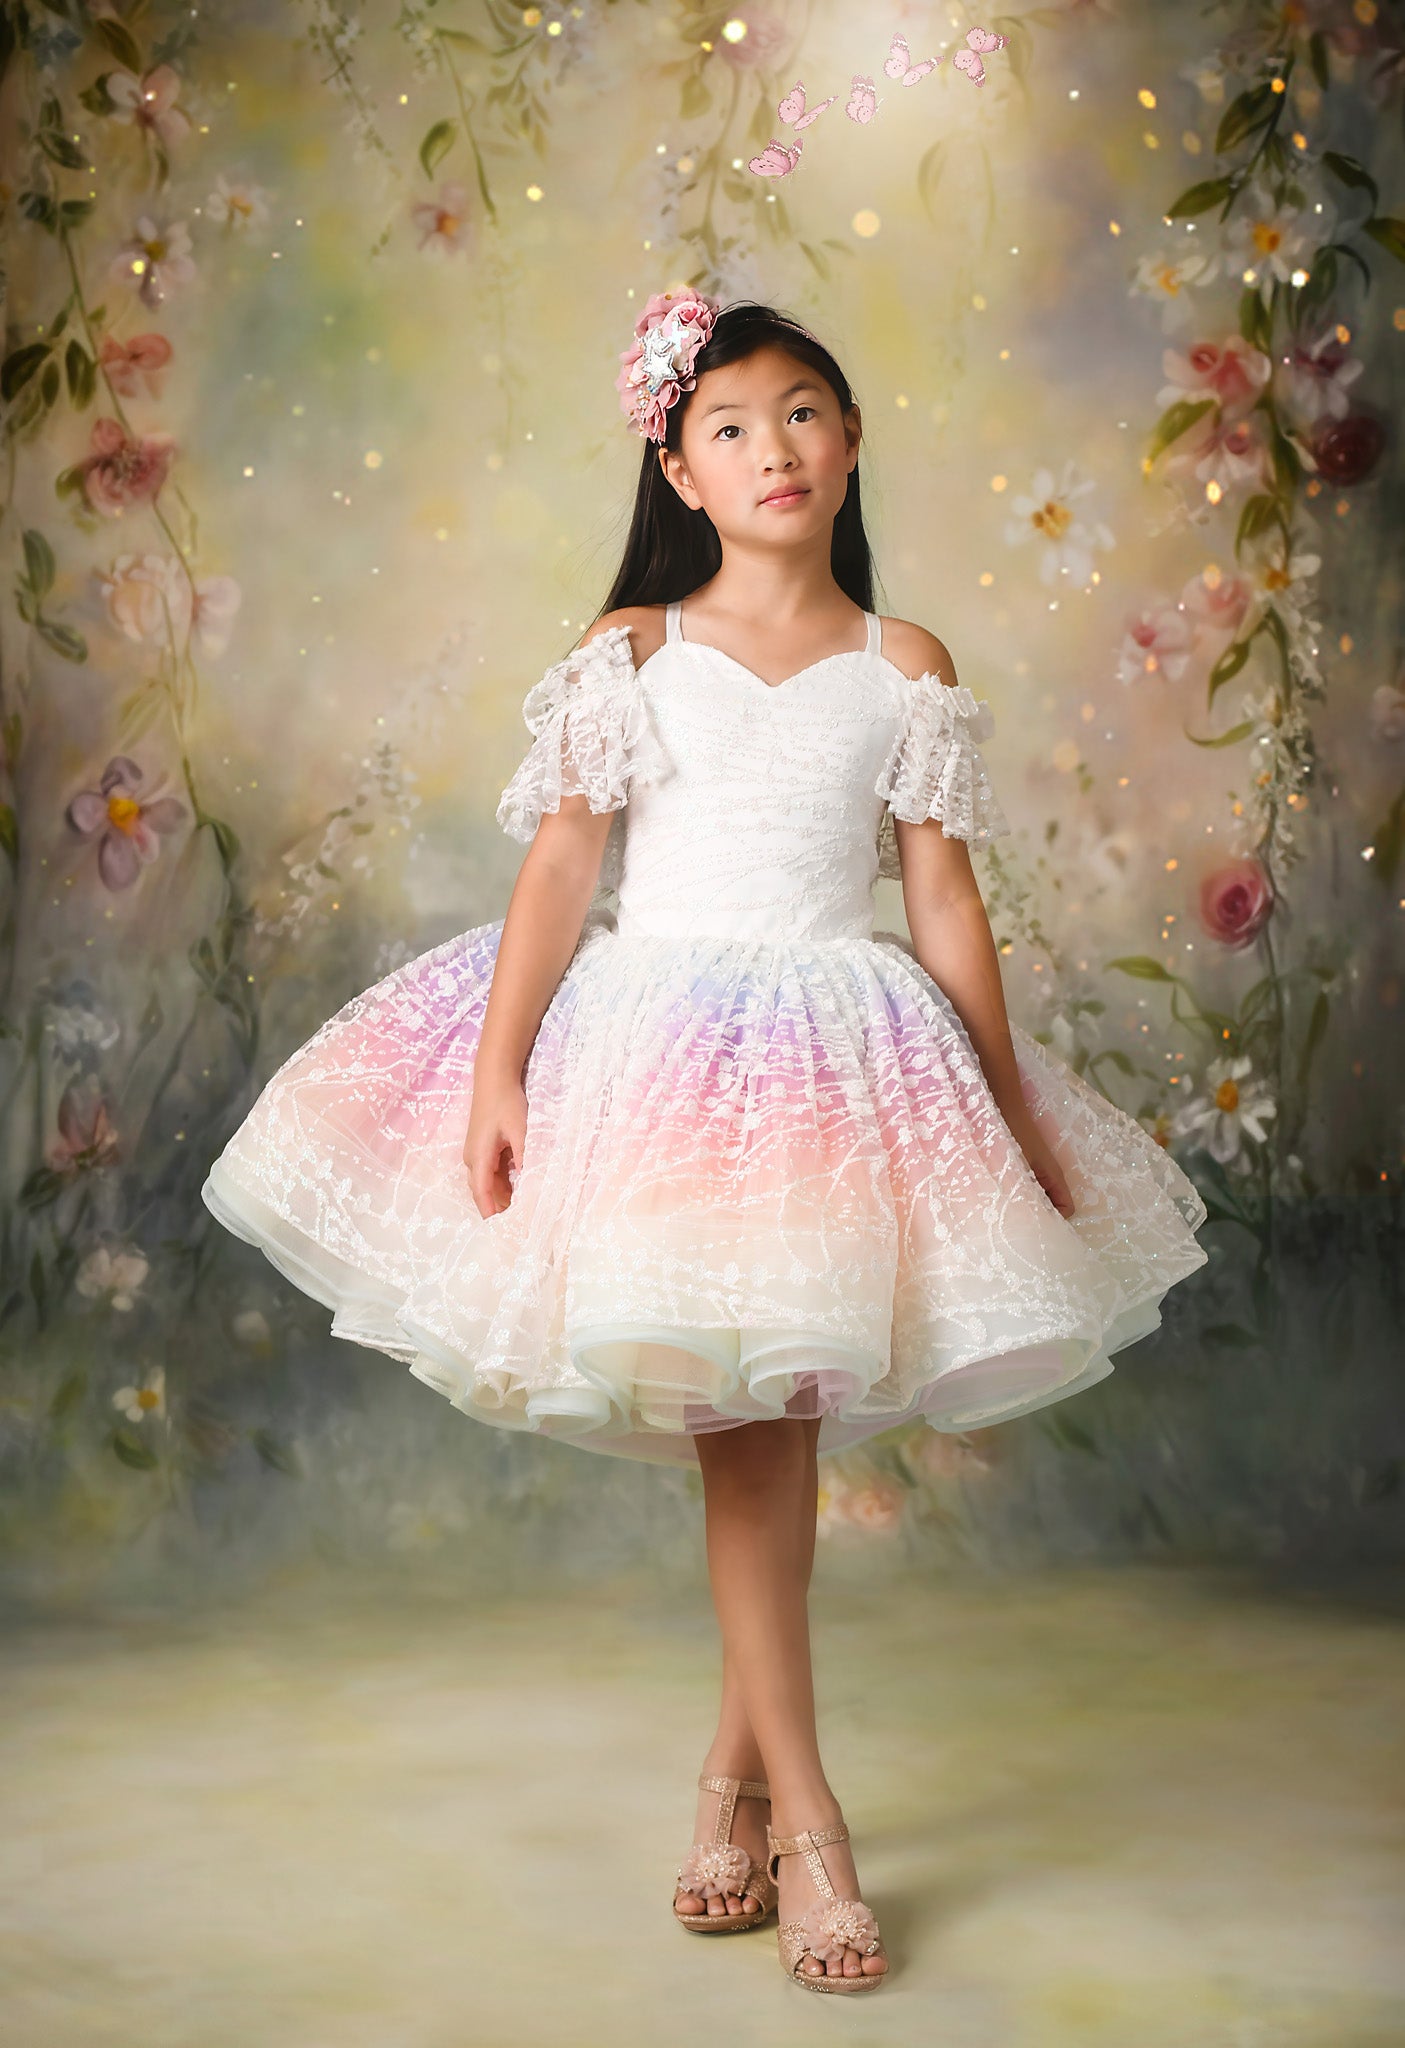 Rental gowns:  Rental dress Rainbow glitter dress for girls. Girls dresses for photography sessions. 